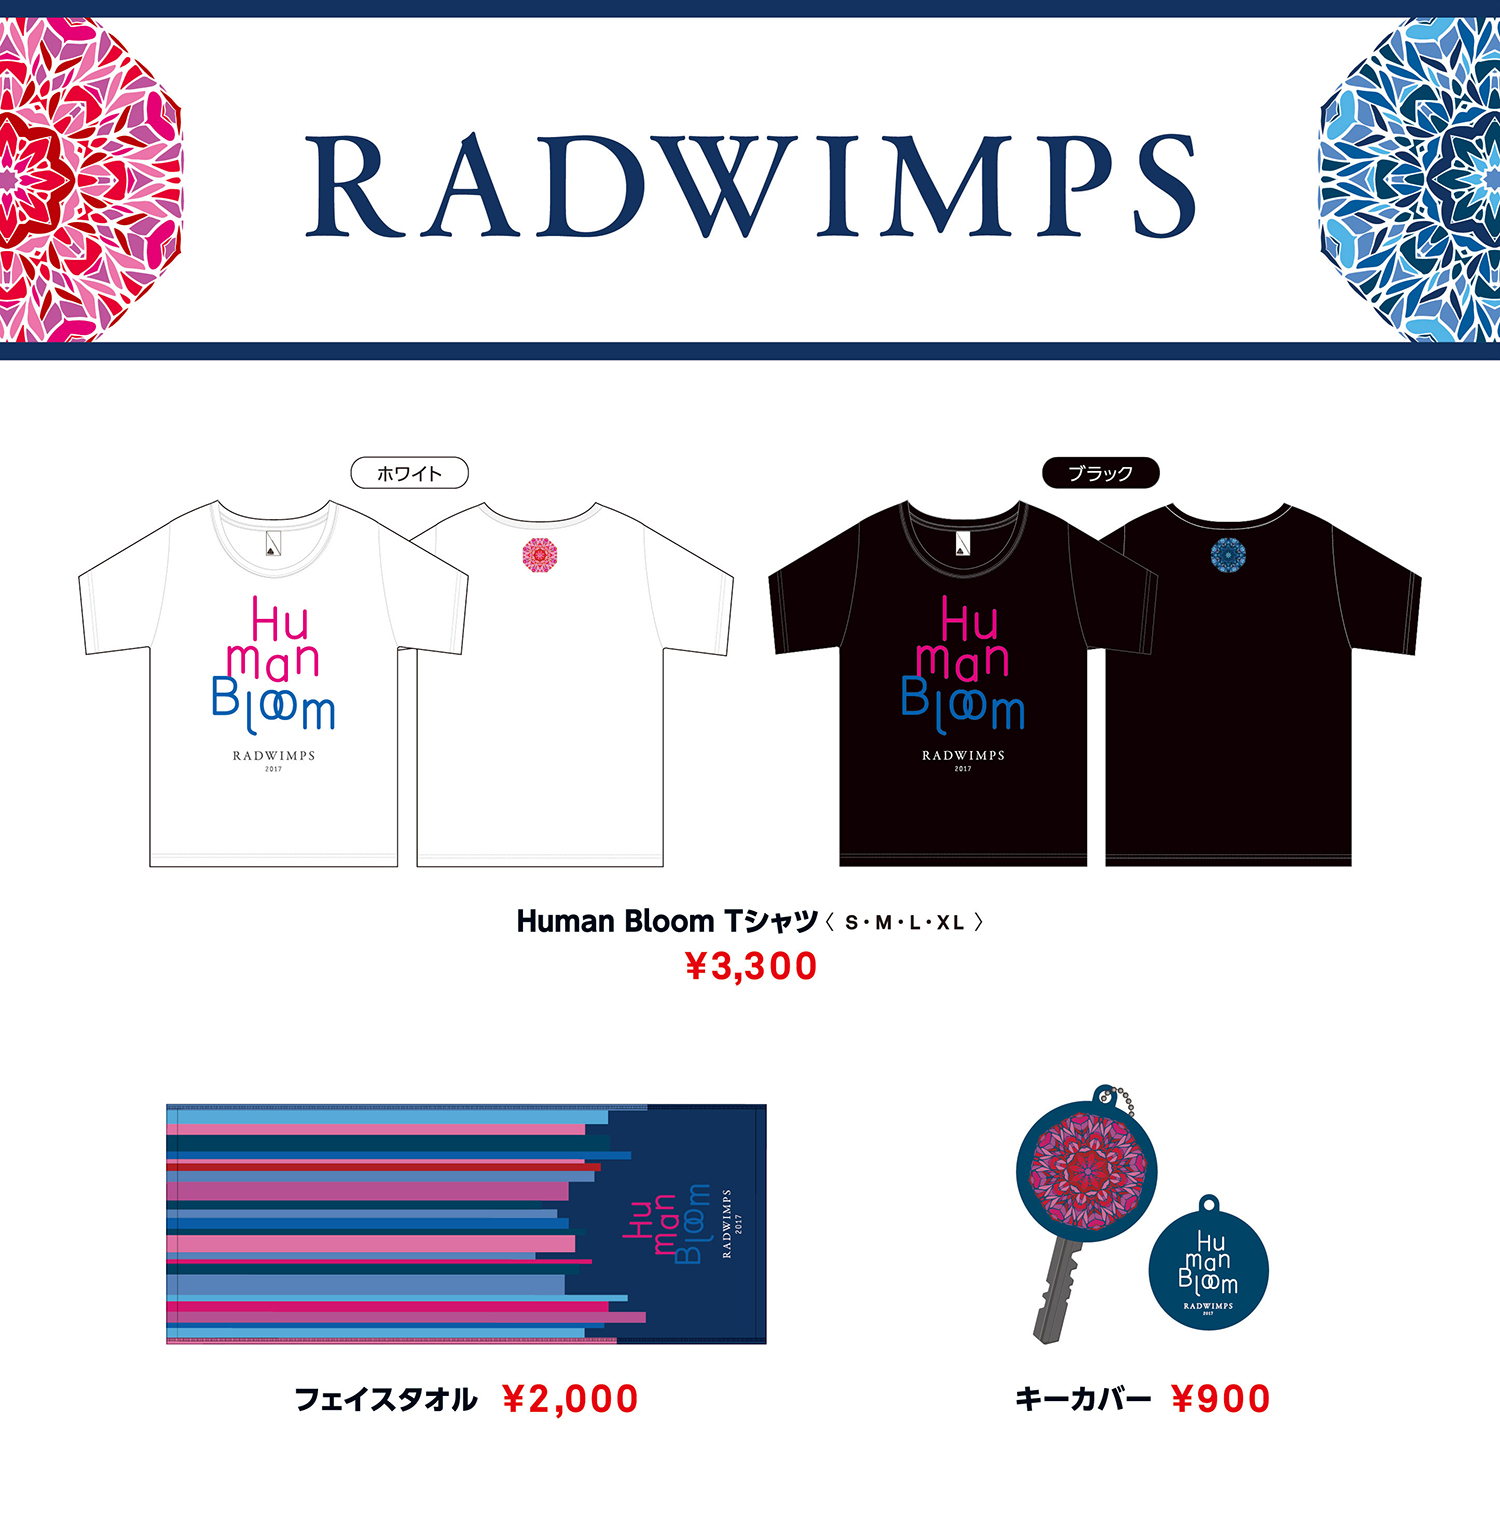 Coldplay A Head Full Of Dream Tour グッズ販売詳細 Radwimps Jp